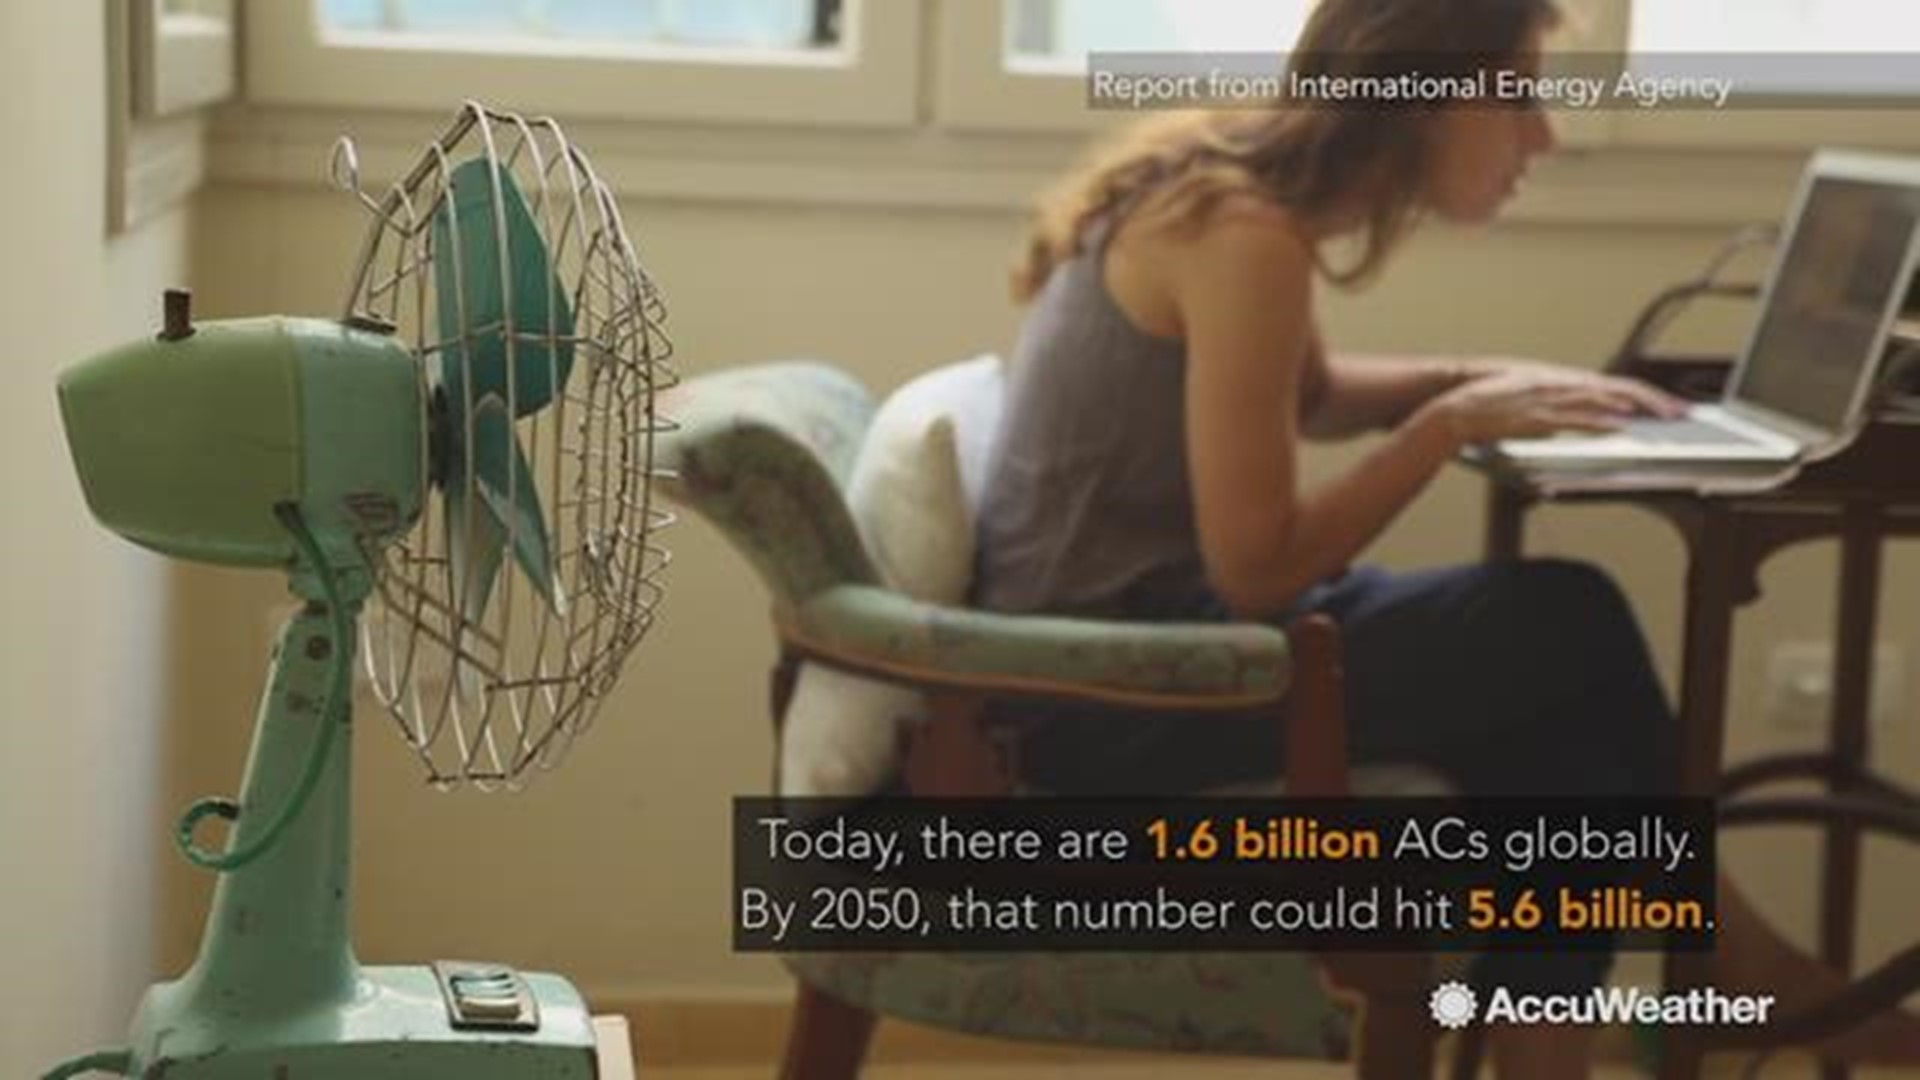 Air conditioners are set to become a top driver in global energy demand over the next 30 years. 